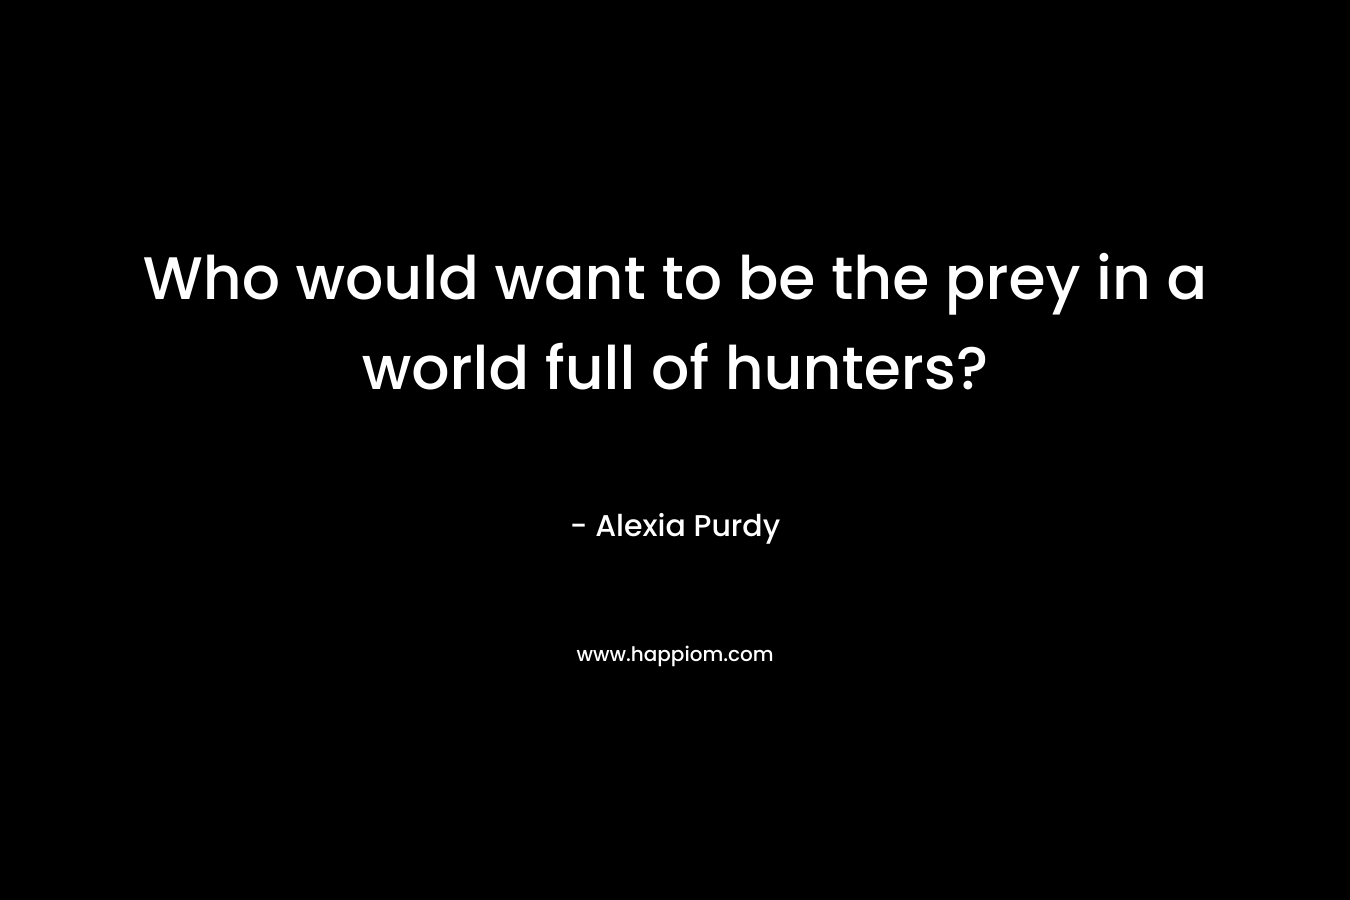 Who would want to be the prey in a world full of hunters?